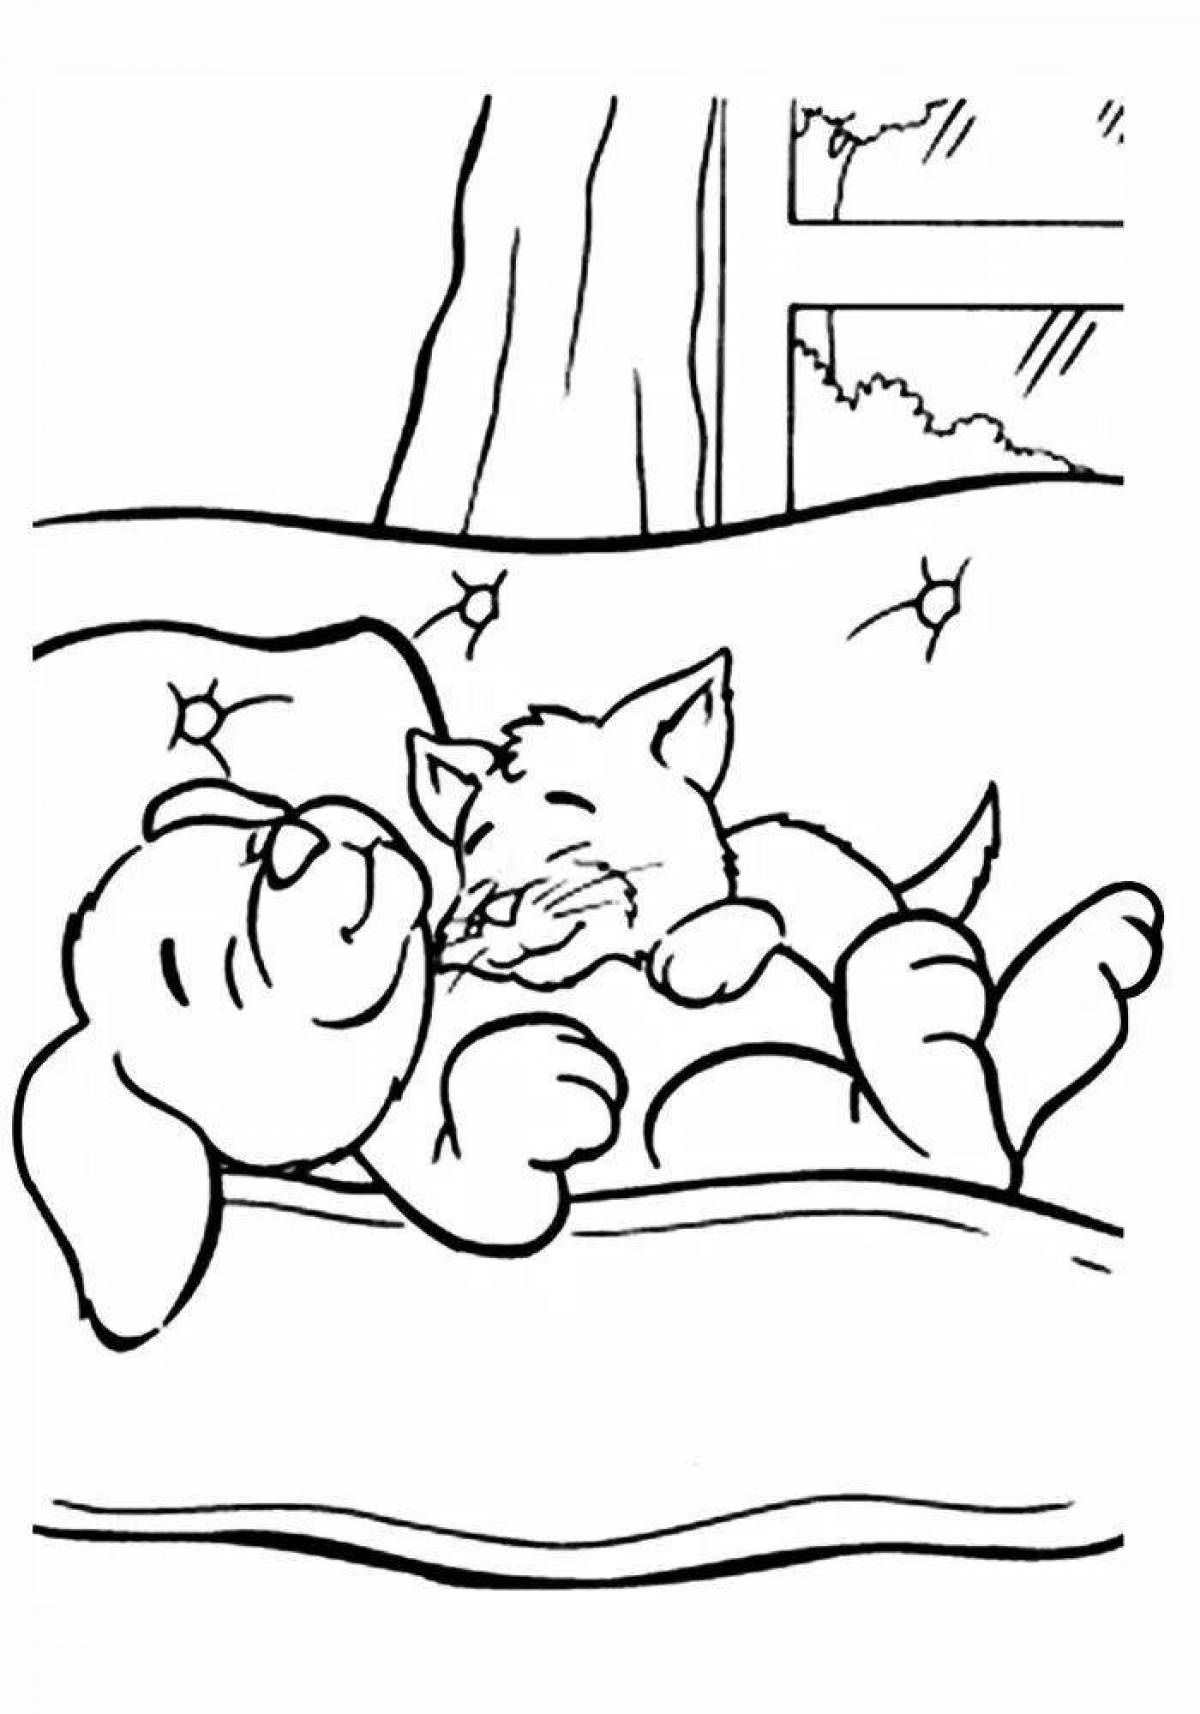 Colorful cat and dog coloring page